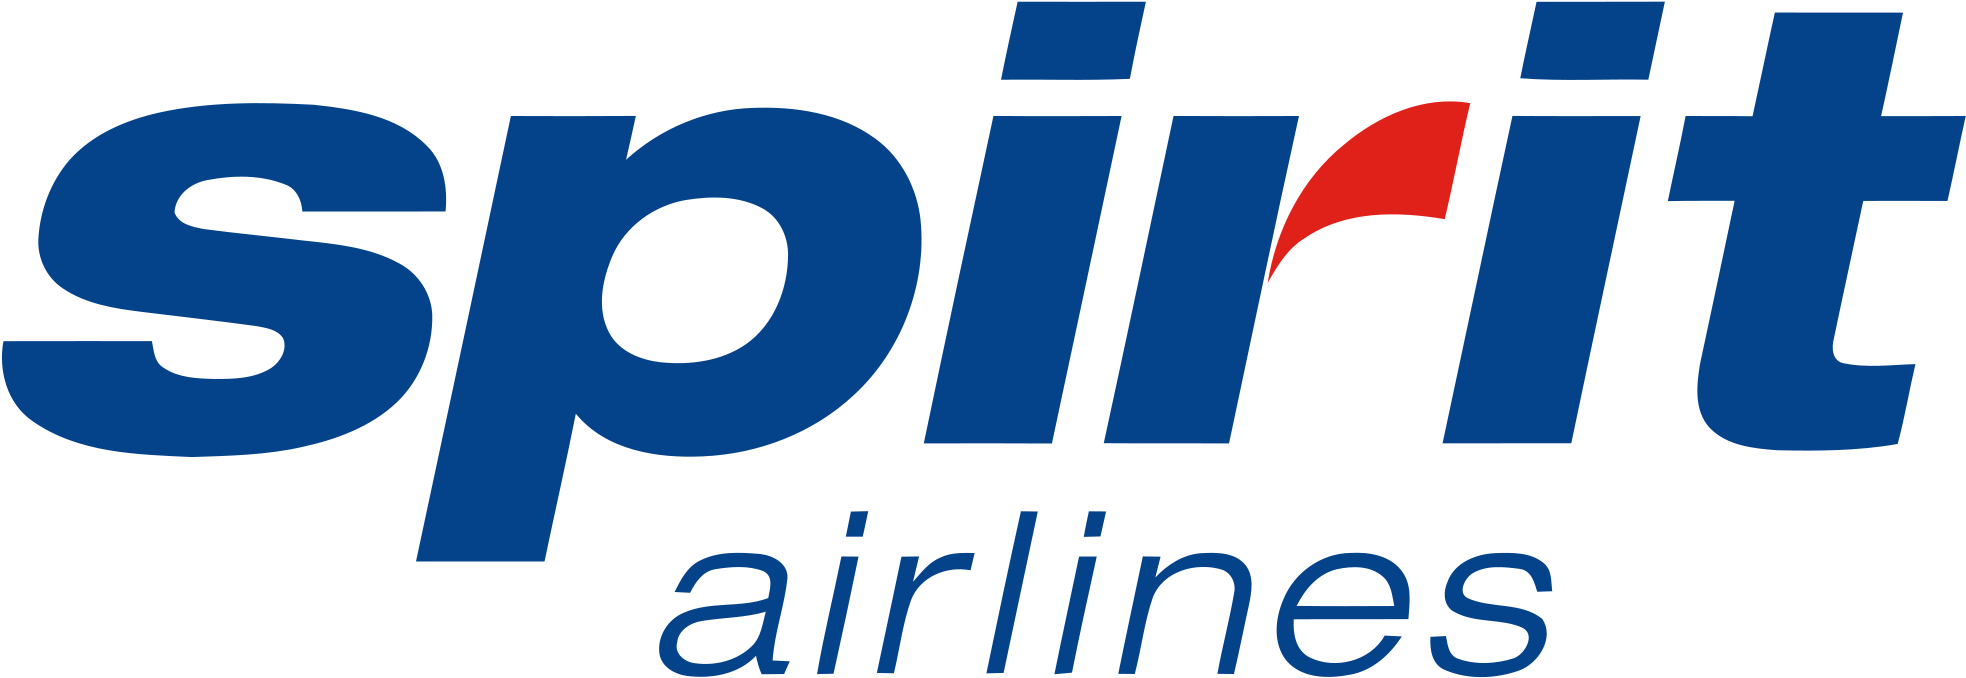 Download Open - Spirit Airlines Inc Logo PNG Image with No Background ...